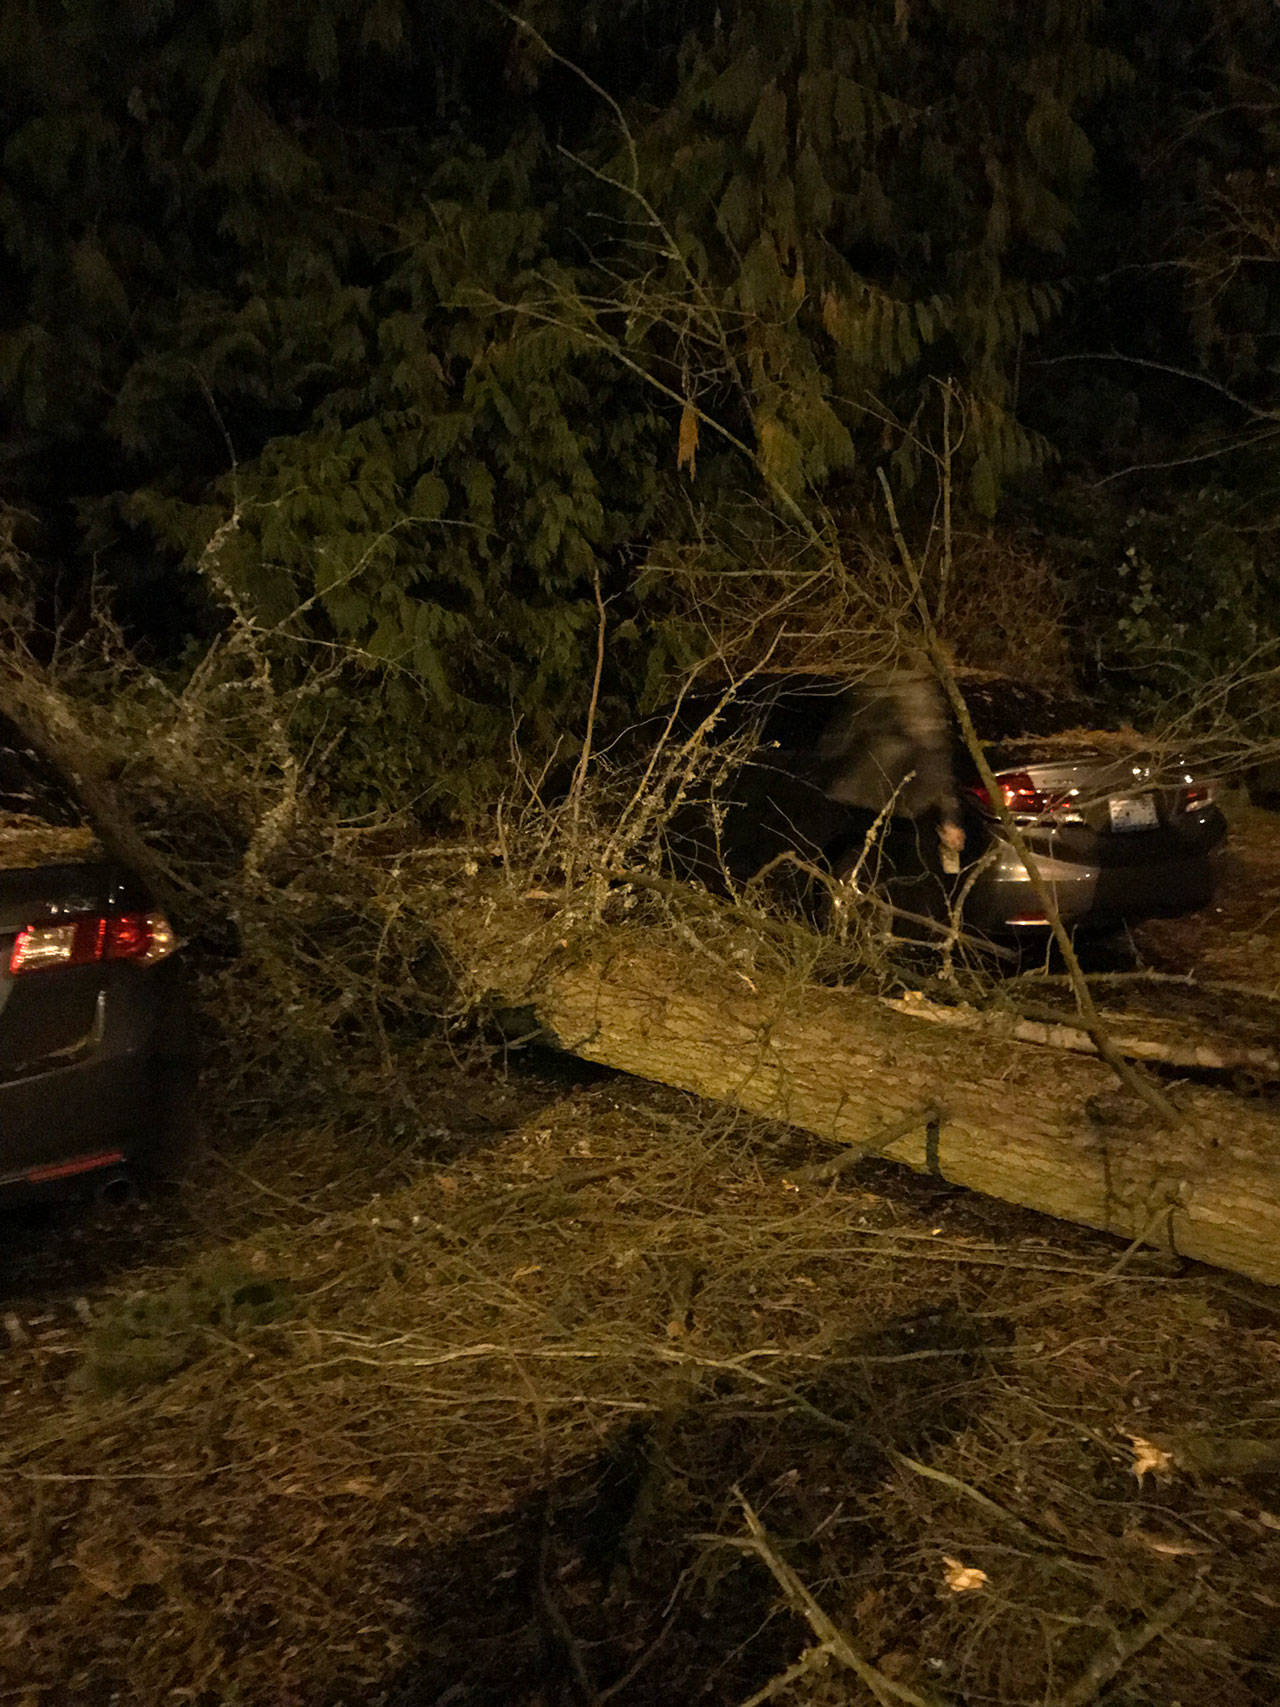 A tree that fell during a windstorm on Dec. 14 landed directly in an empty parking spot in the parking lot of a condominium complex on Finn Hill in Kirkland. Samantha Pak/staff photo